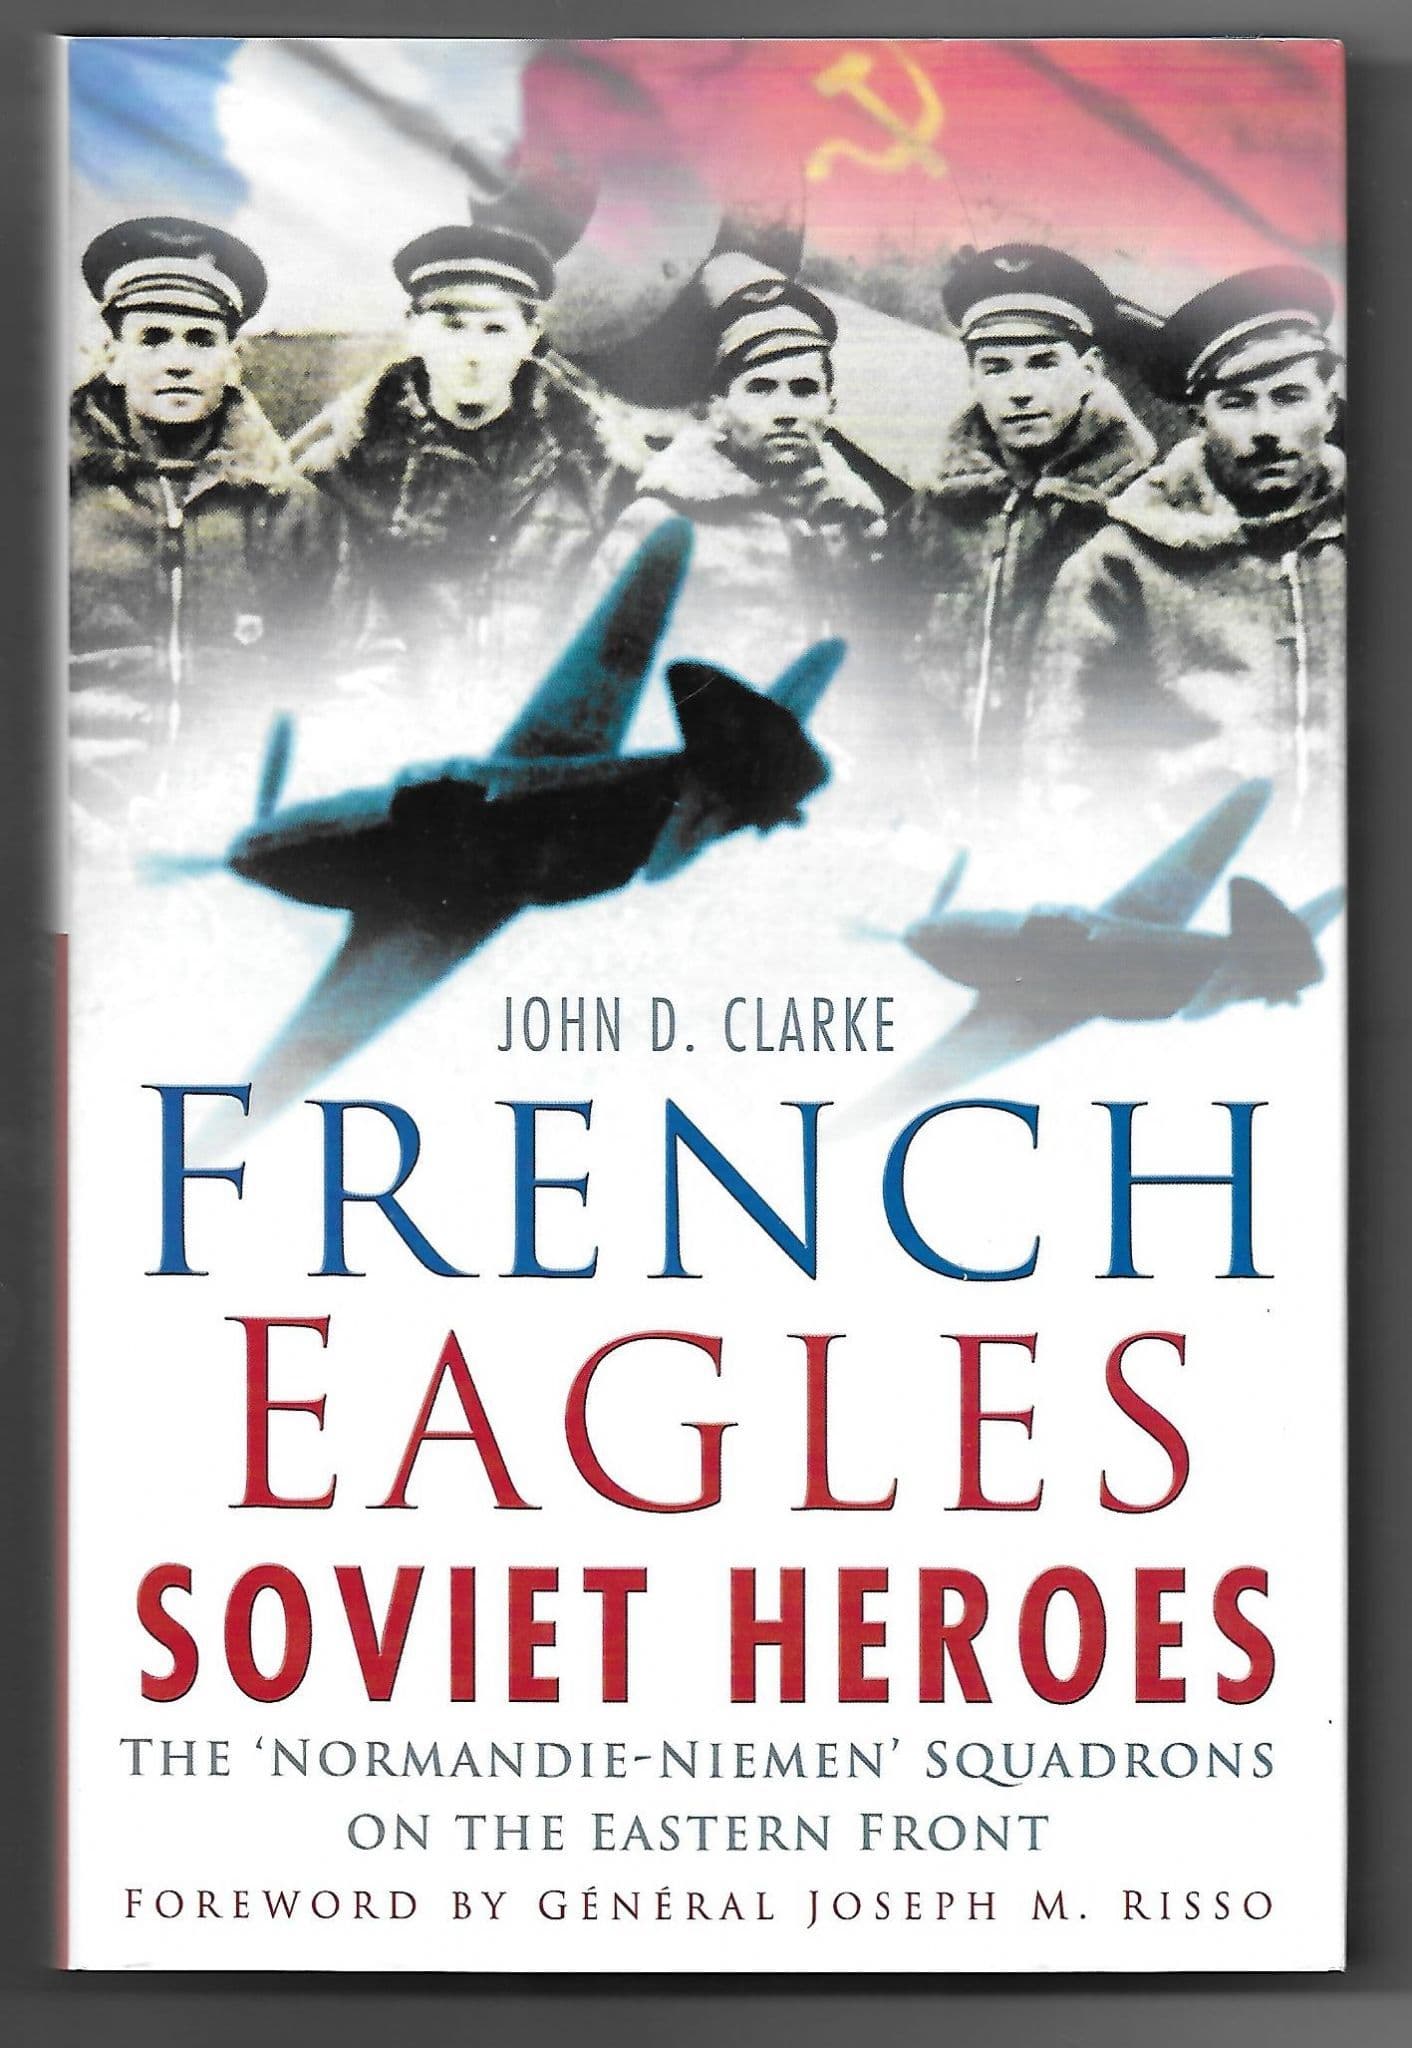 French Eagles Soviet Heroes